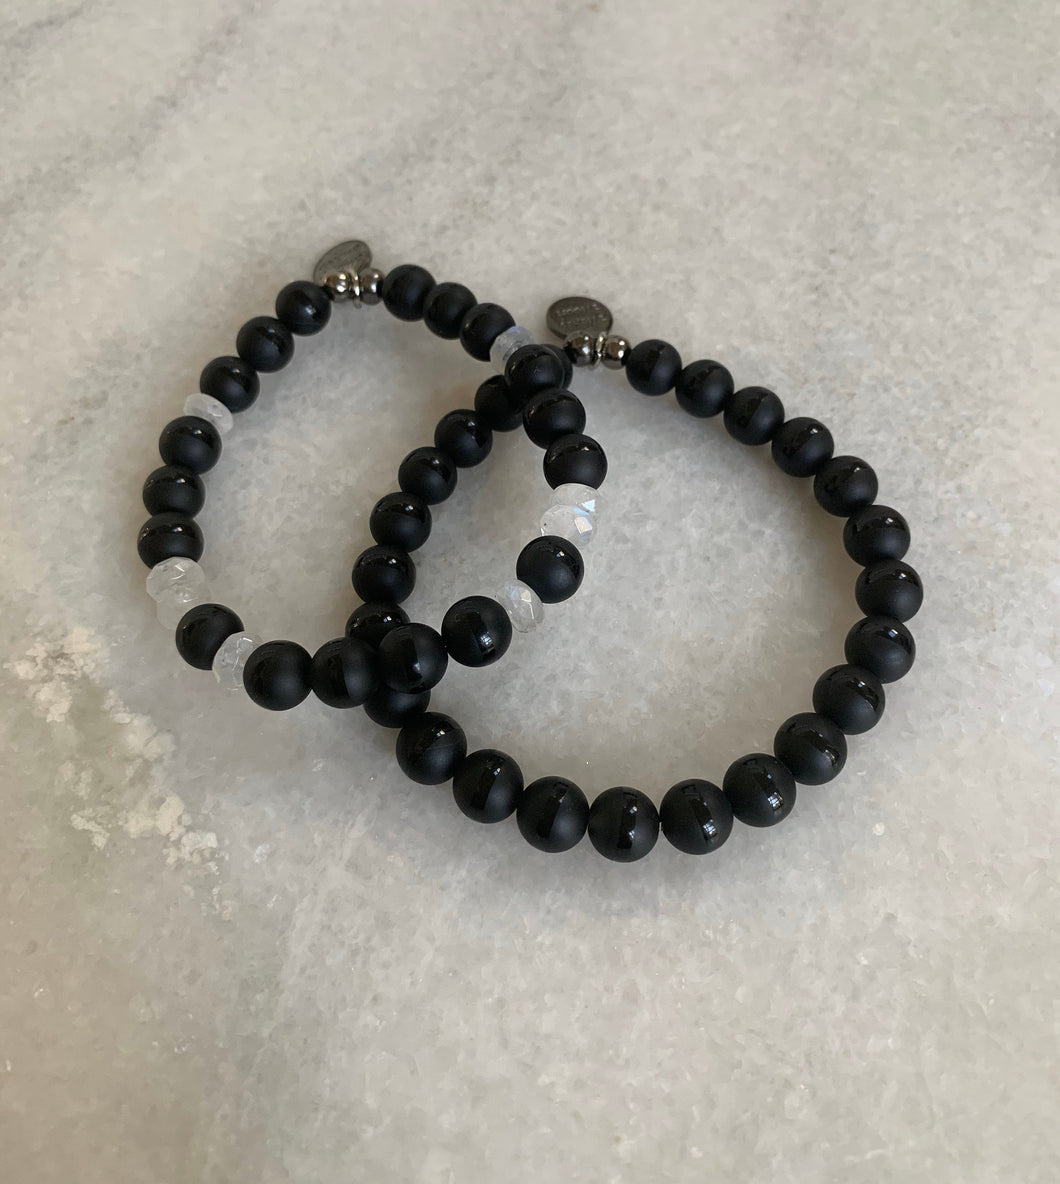 Couple Goals His & Hers Black Agate and Moonstone beaded bracelets